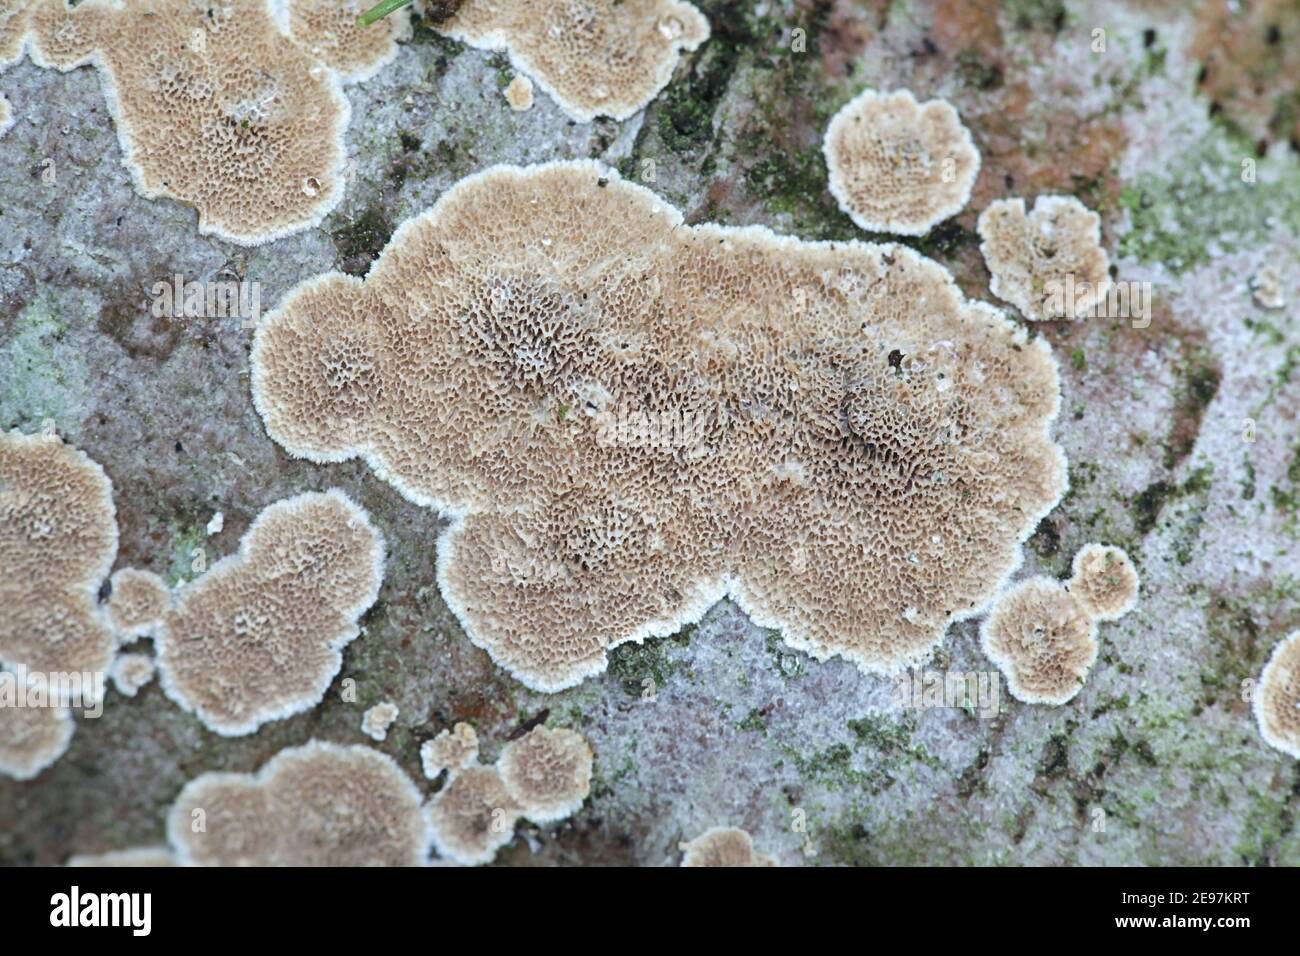 Trichaptum abietinum, known as purplepore bracket fungus or violet-toothed polypore, wild fungus from Finland Stock Photo